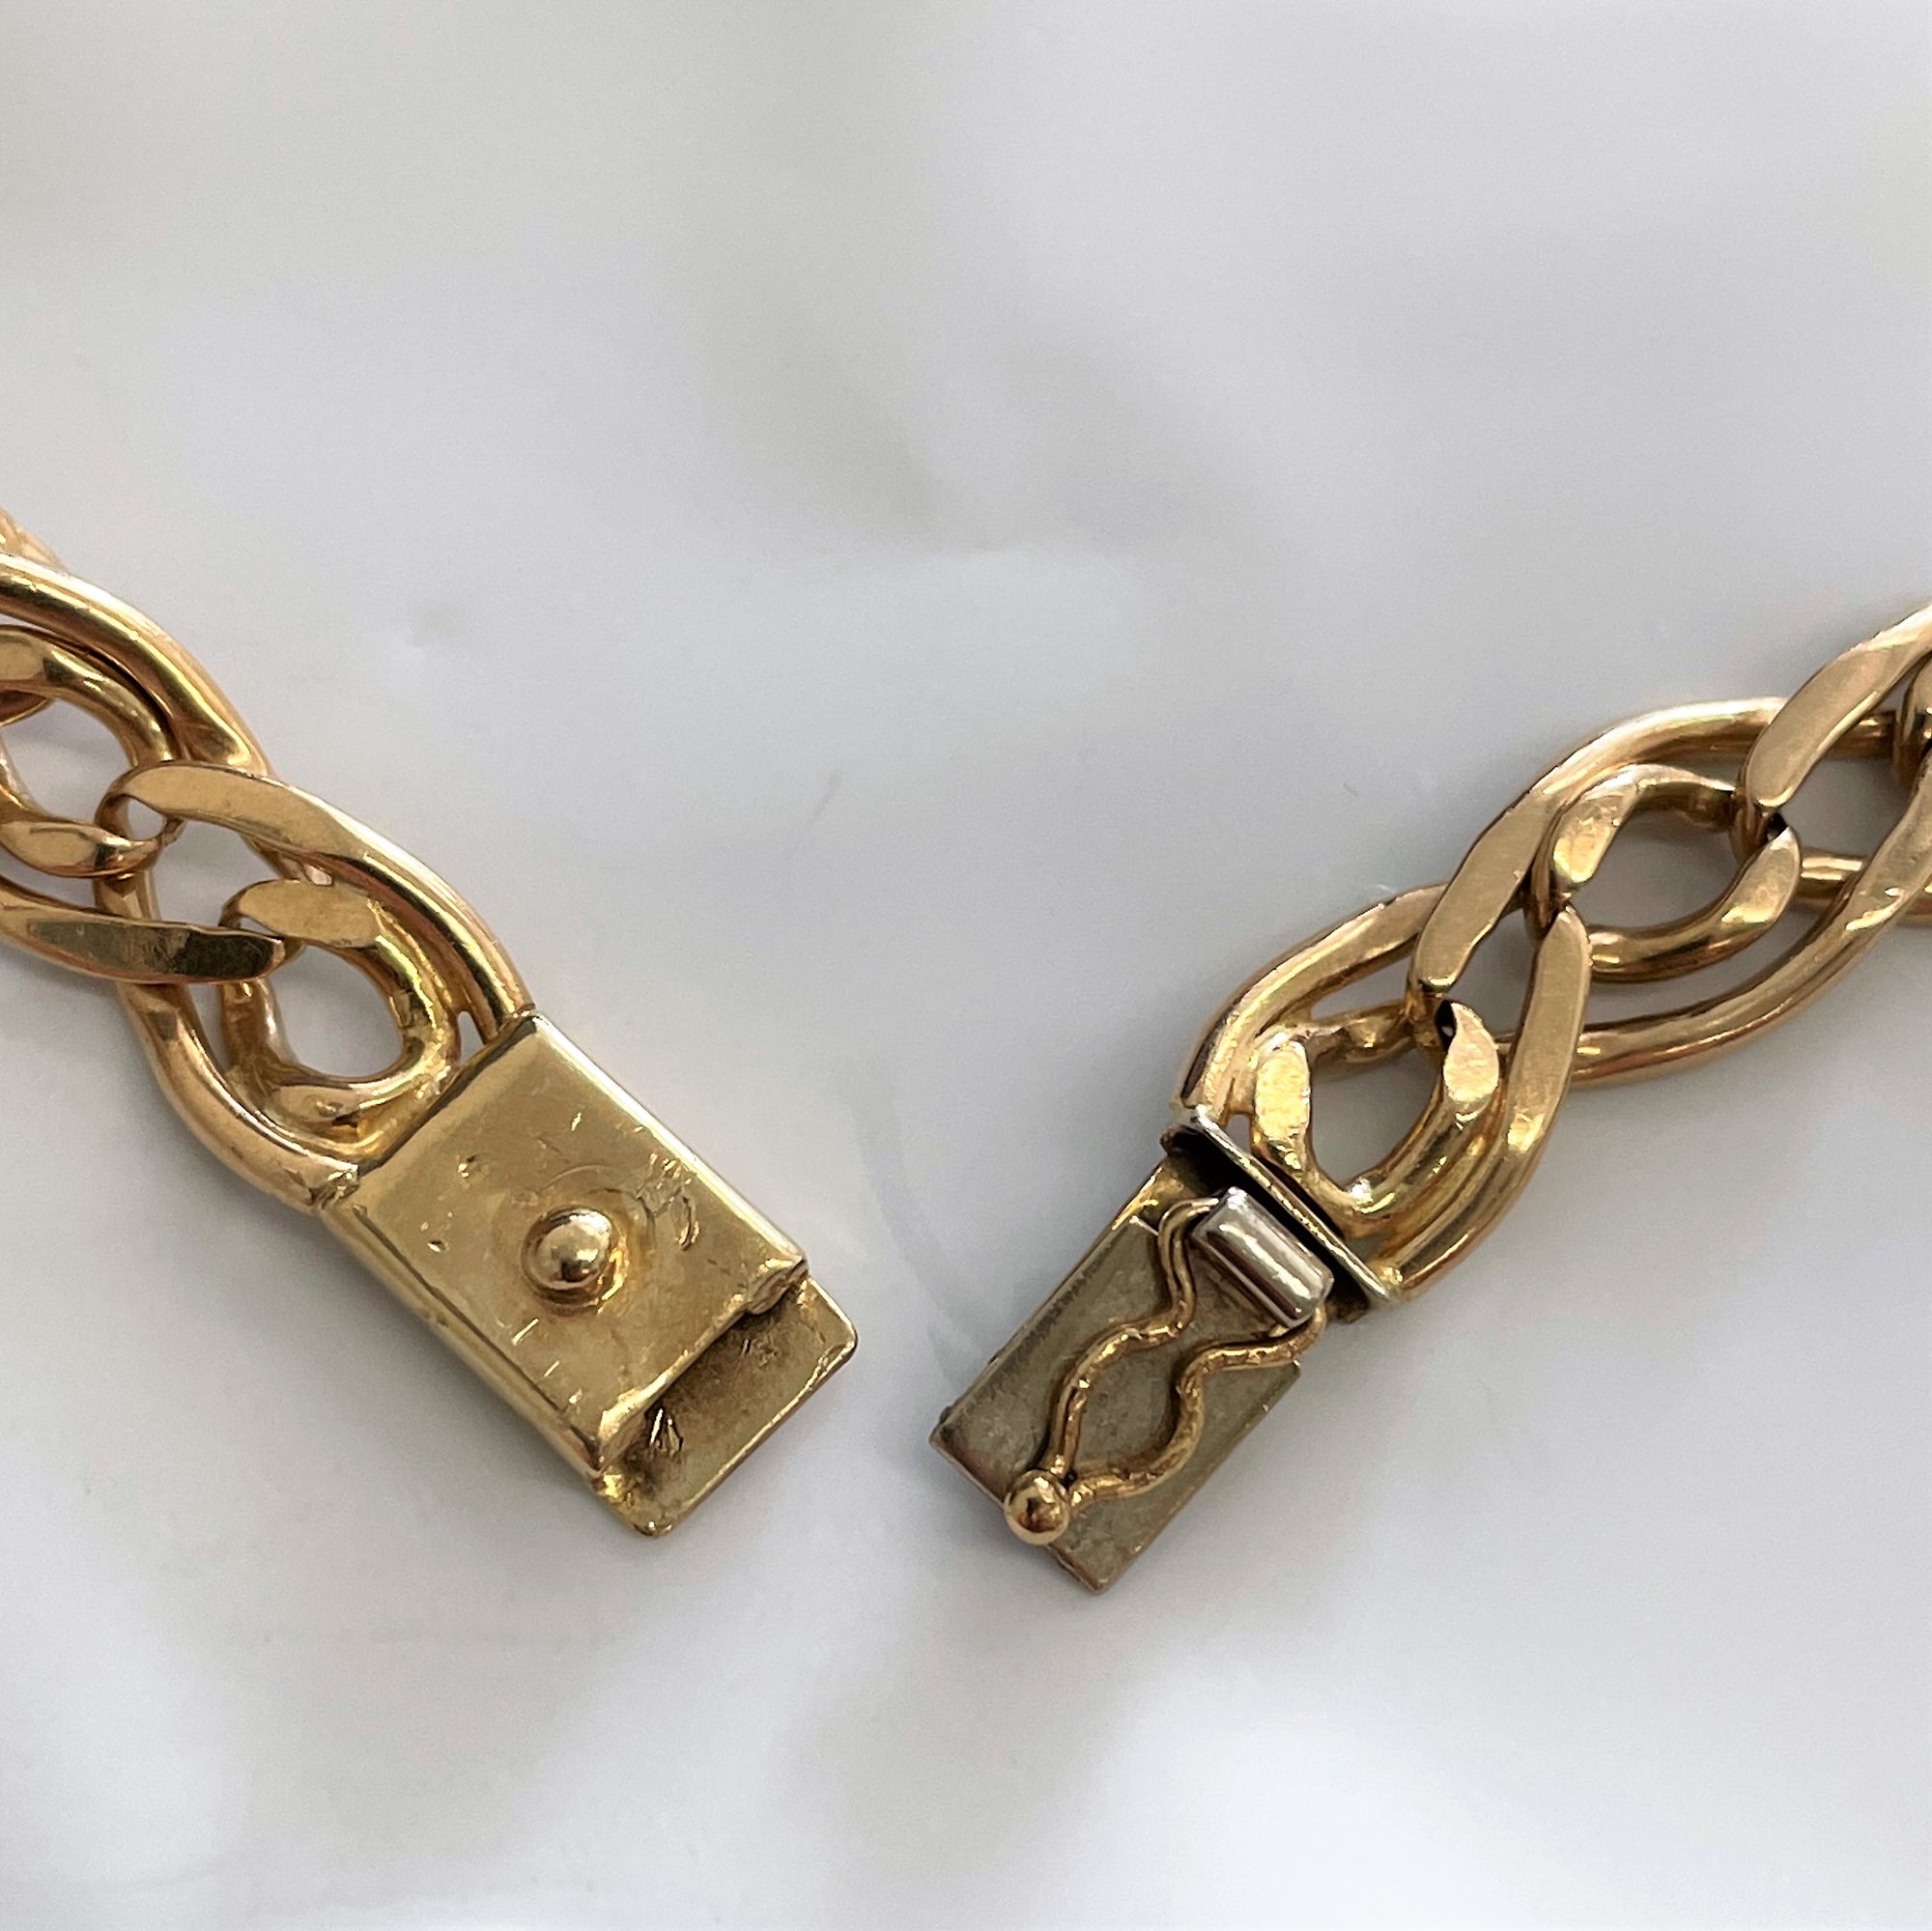 14k Yellow Gold Parallel Cable Chain | 23